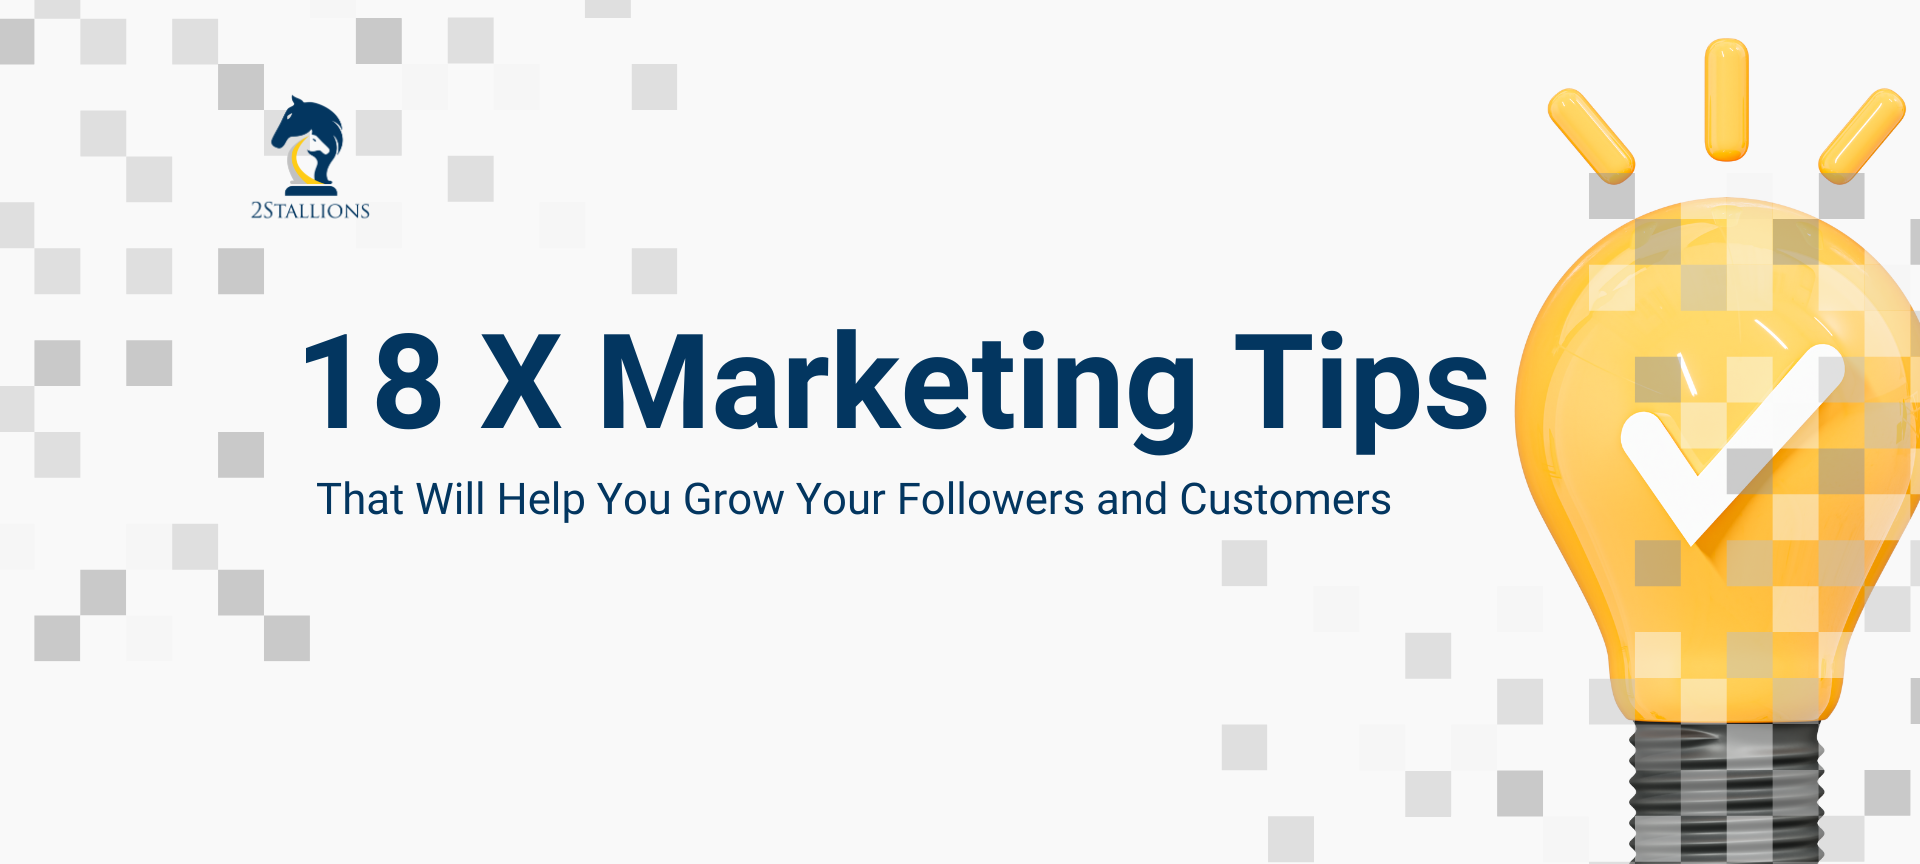 18 X Marketing Tips That Will Help You Grow Your Followers and Customers